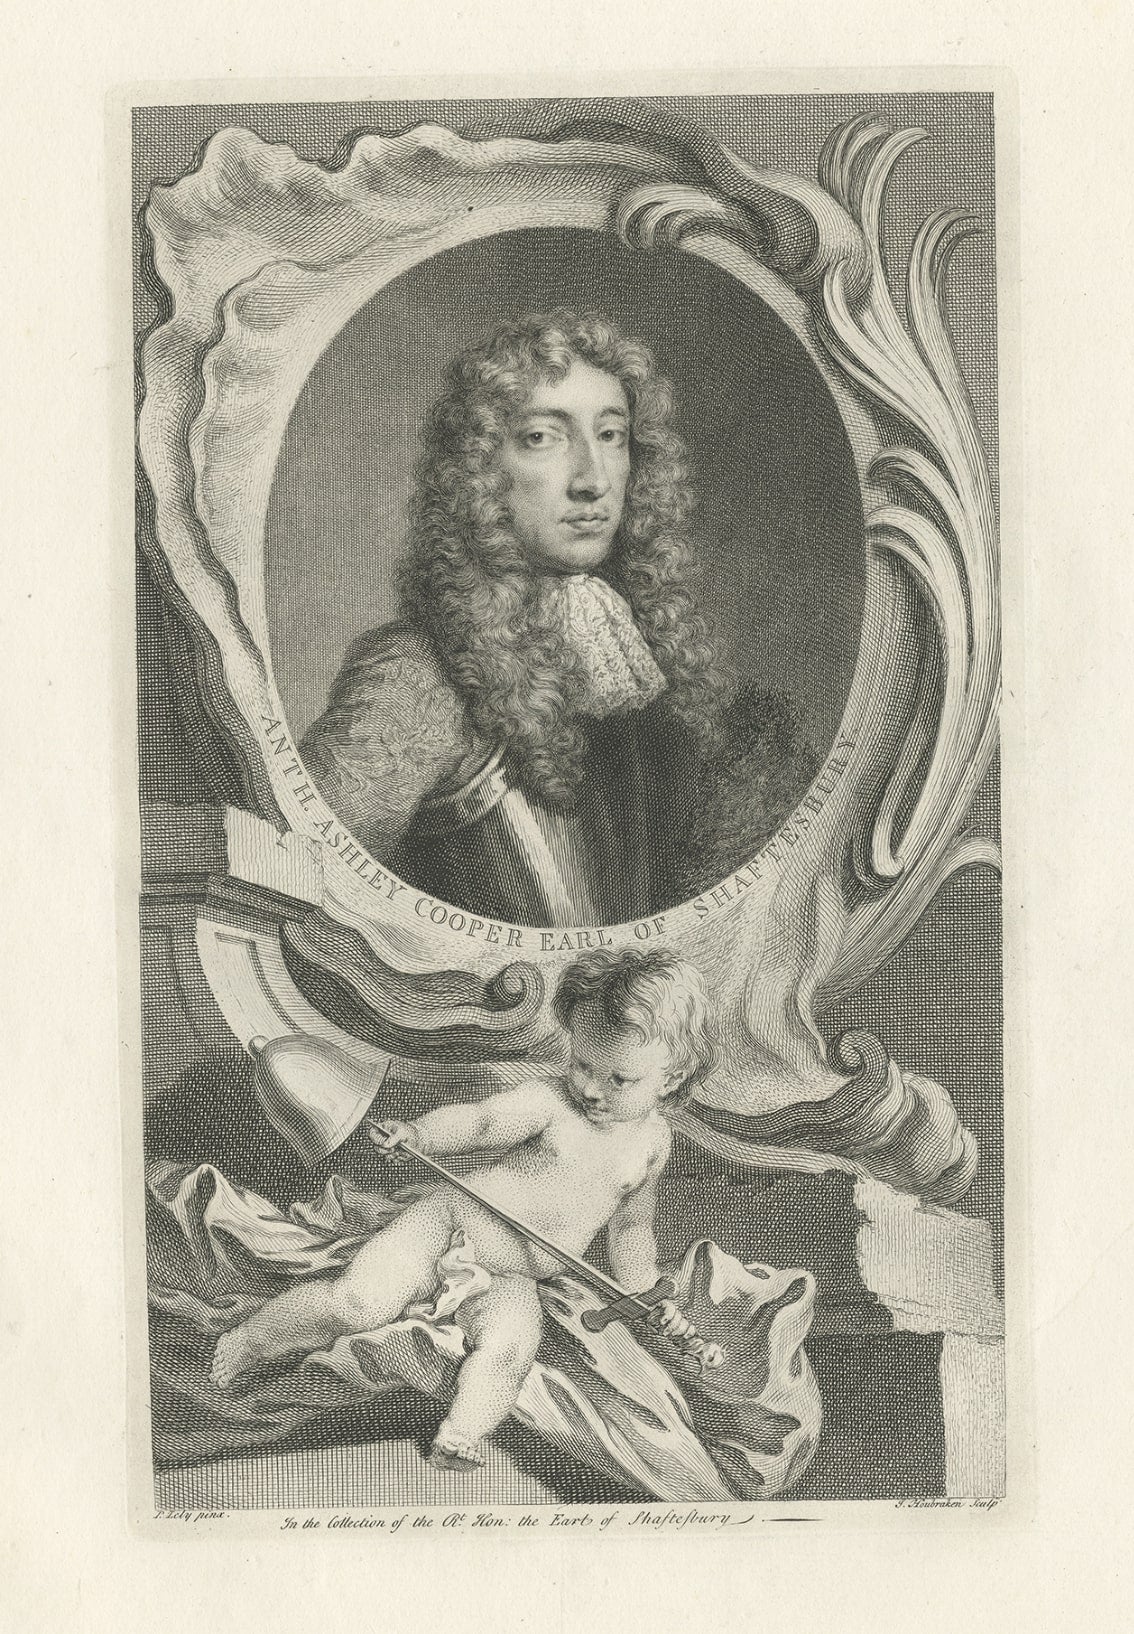 Antique portrait titled 'Anth. Ashley Cooper, Earl of Shaftesbury'. Anthony Ashley Cooper, 3rd Earl of Shaftesbury (1671-1713) was an English politician, philosopher and writer. This print originates from 'The Heads of Illustrious Persons of Great